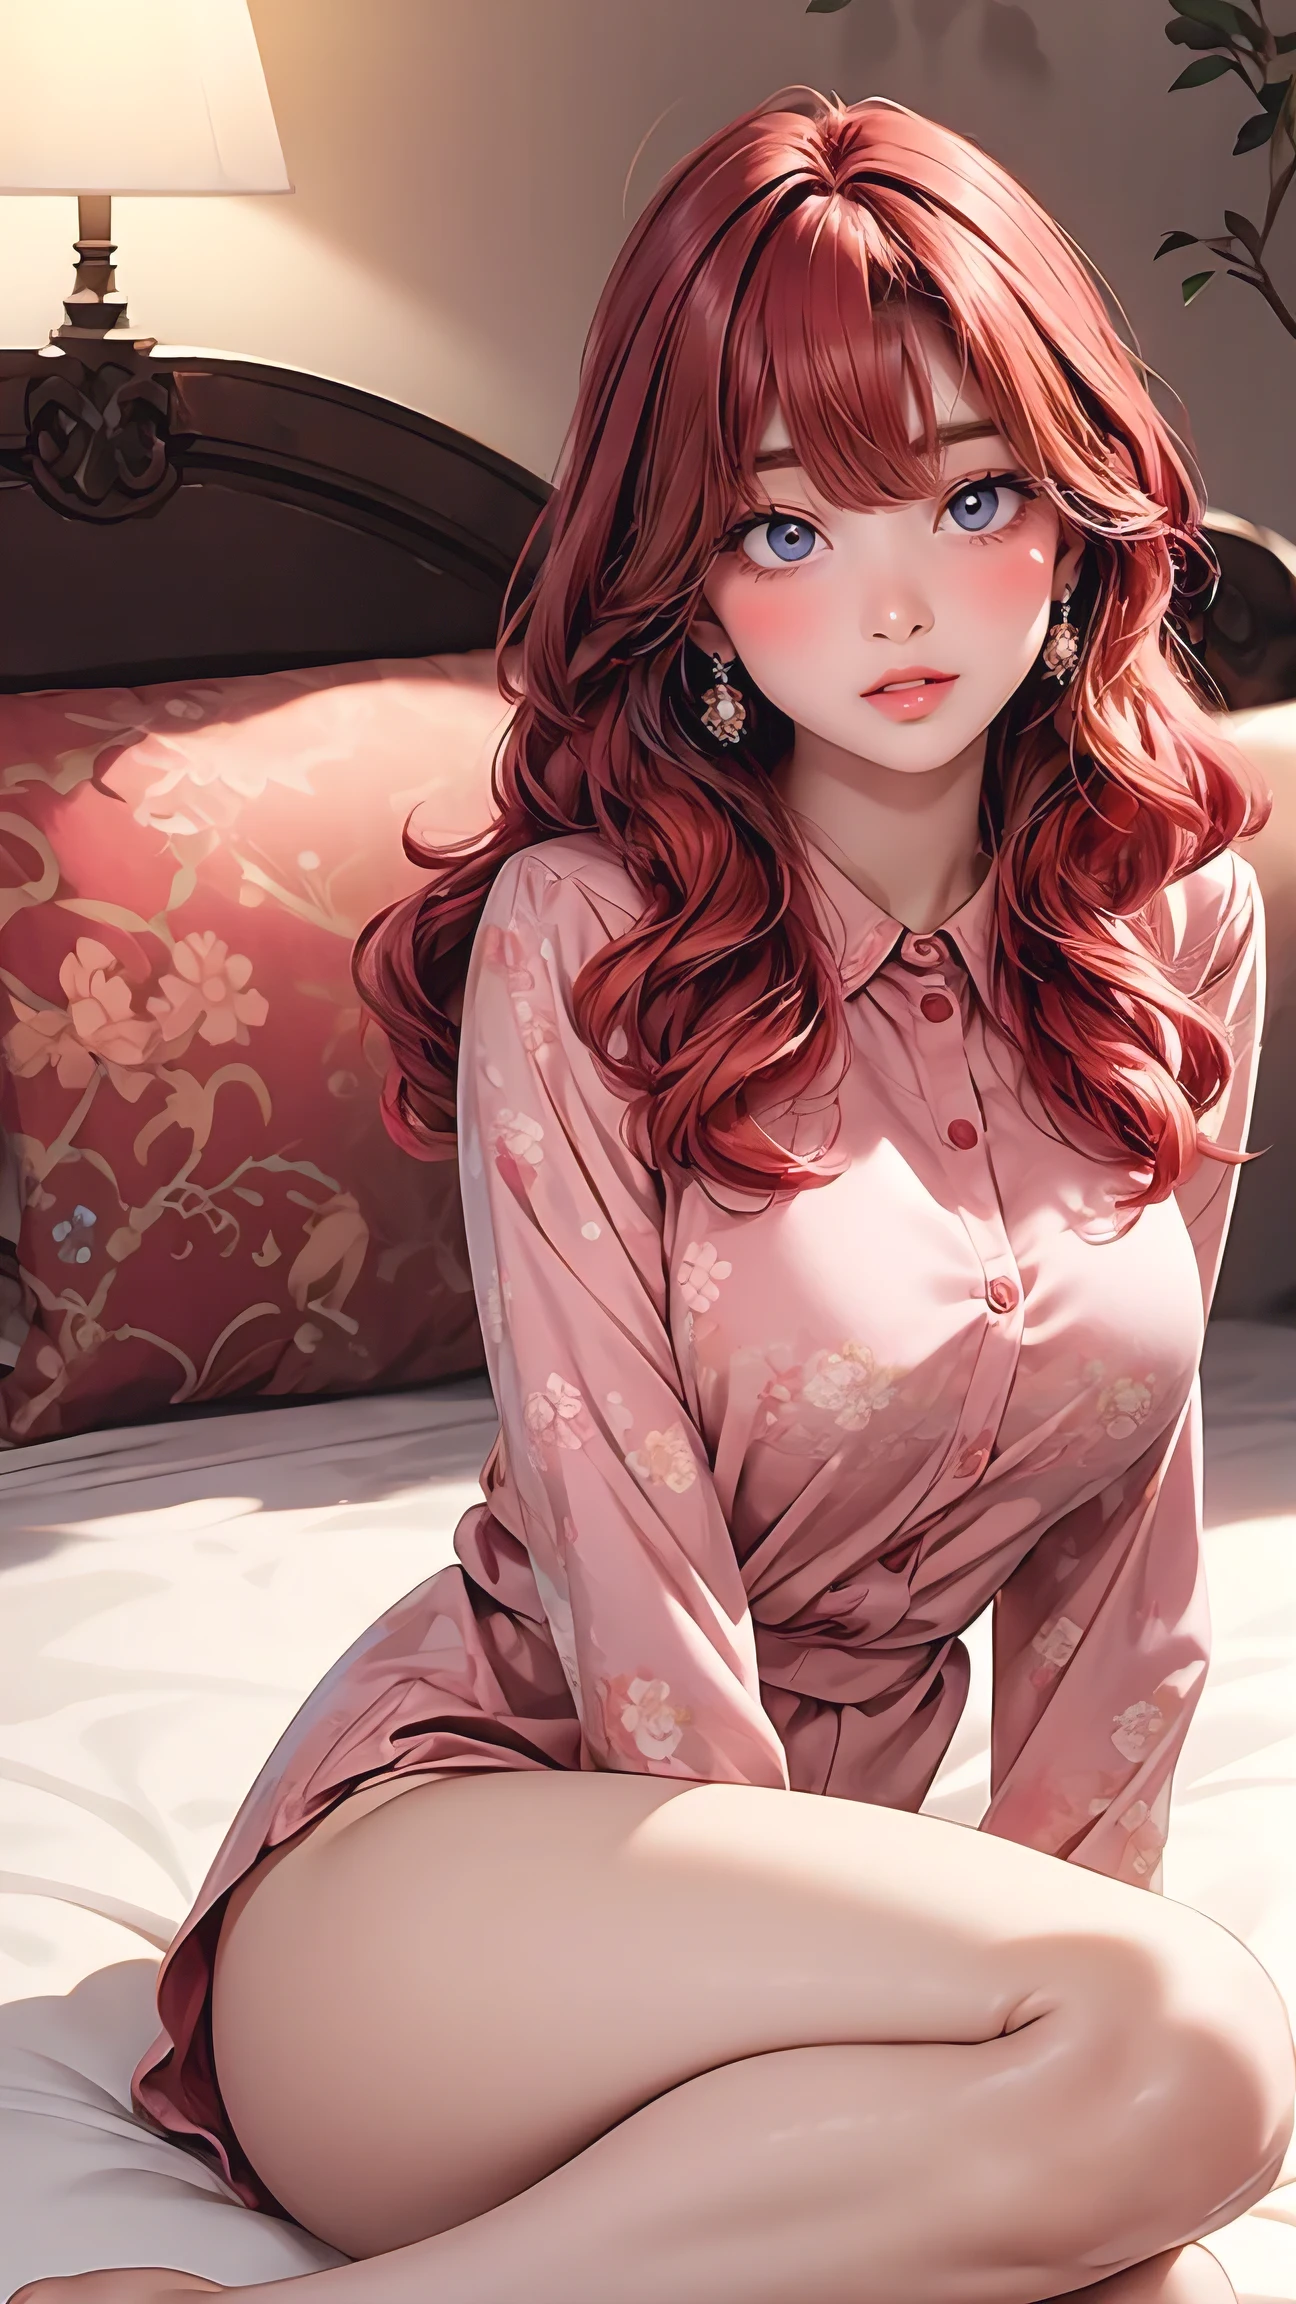 masterpiece, best quality, solo, woman, perfect slim fit body, thick thighs, large breasts, sitting pose, on bed, pink floral pajamas, wavy red hair, attractive feature, elaborate details, chic, ambient light